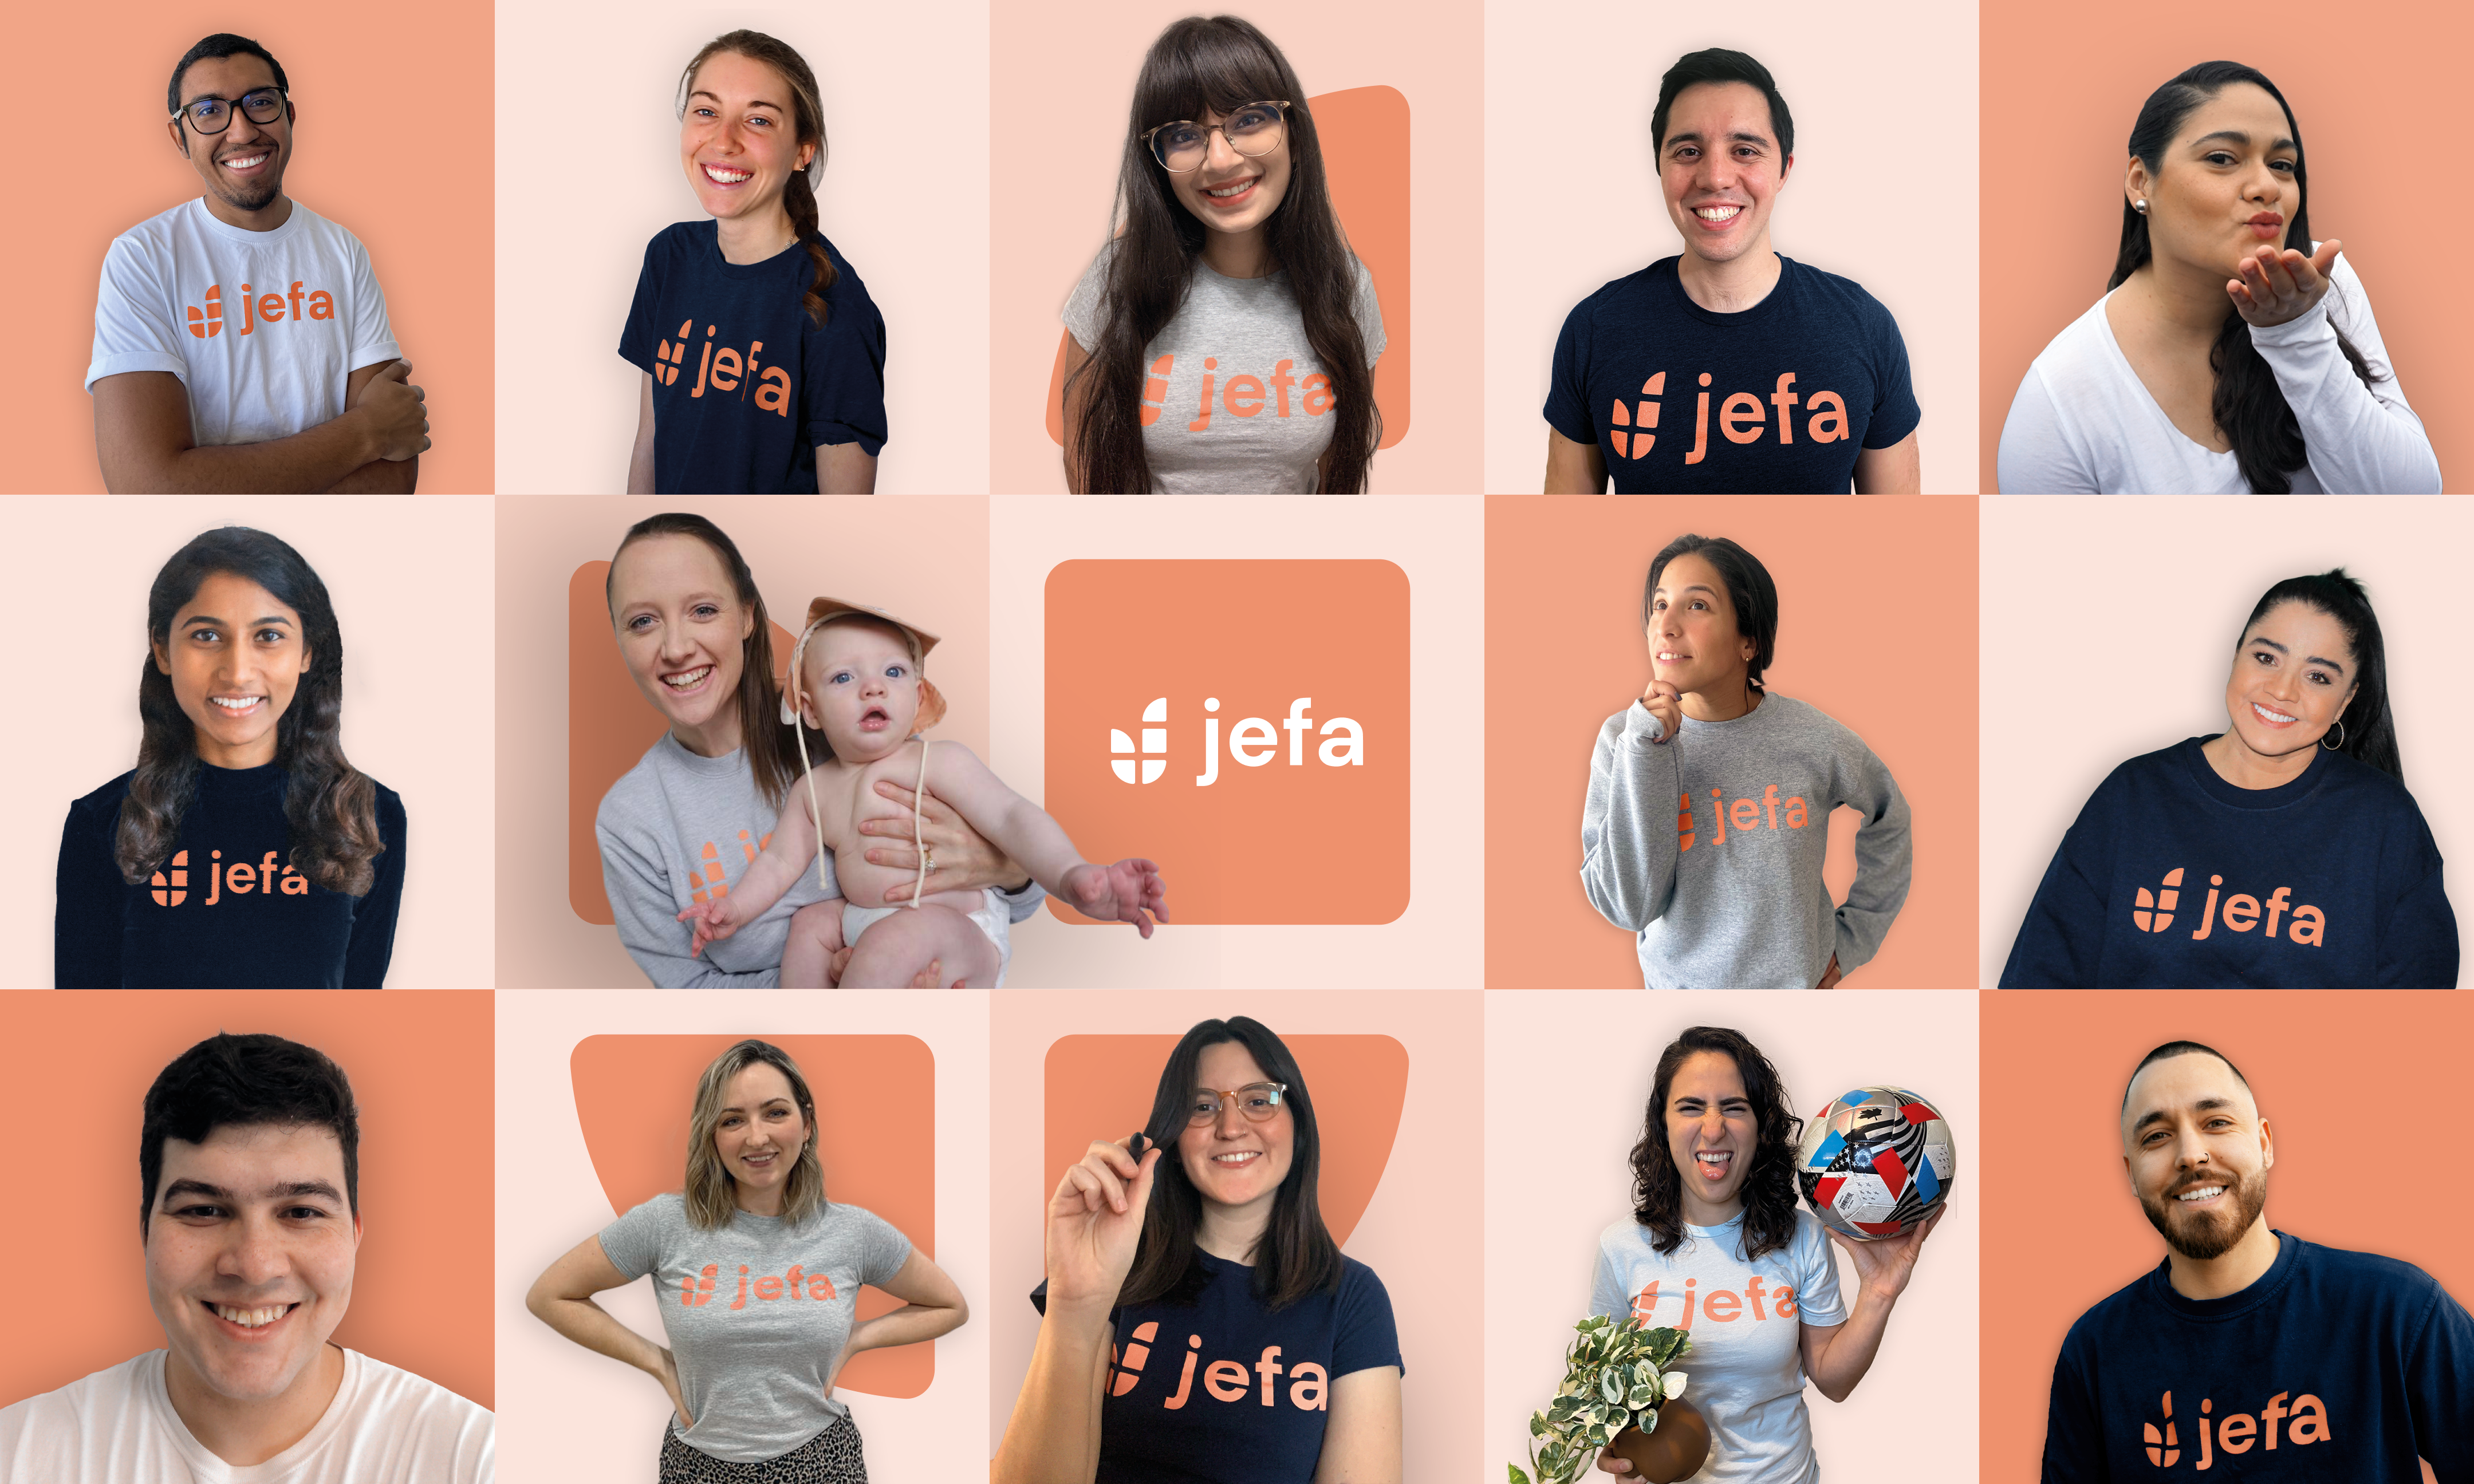 Fintech startup Jefa raises $2M in Seed funding round